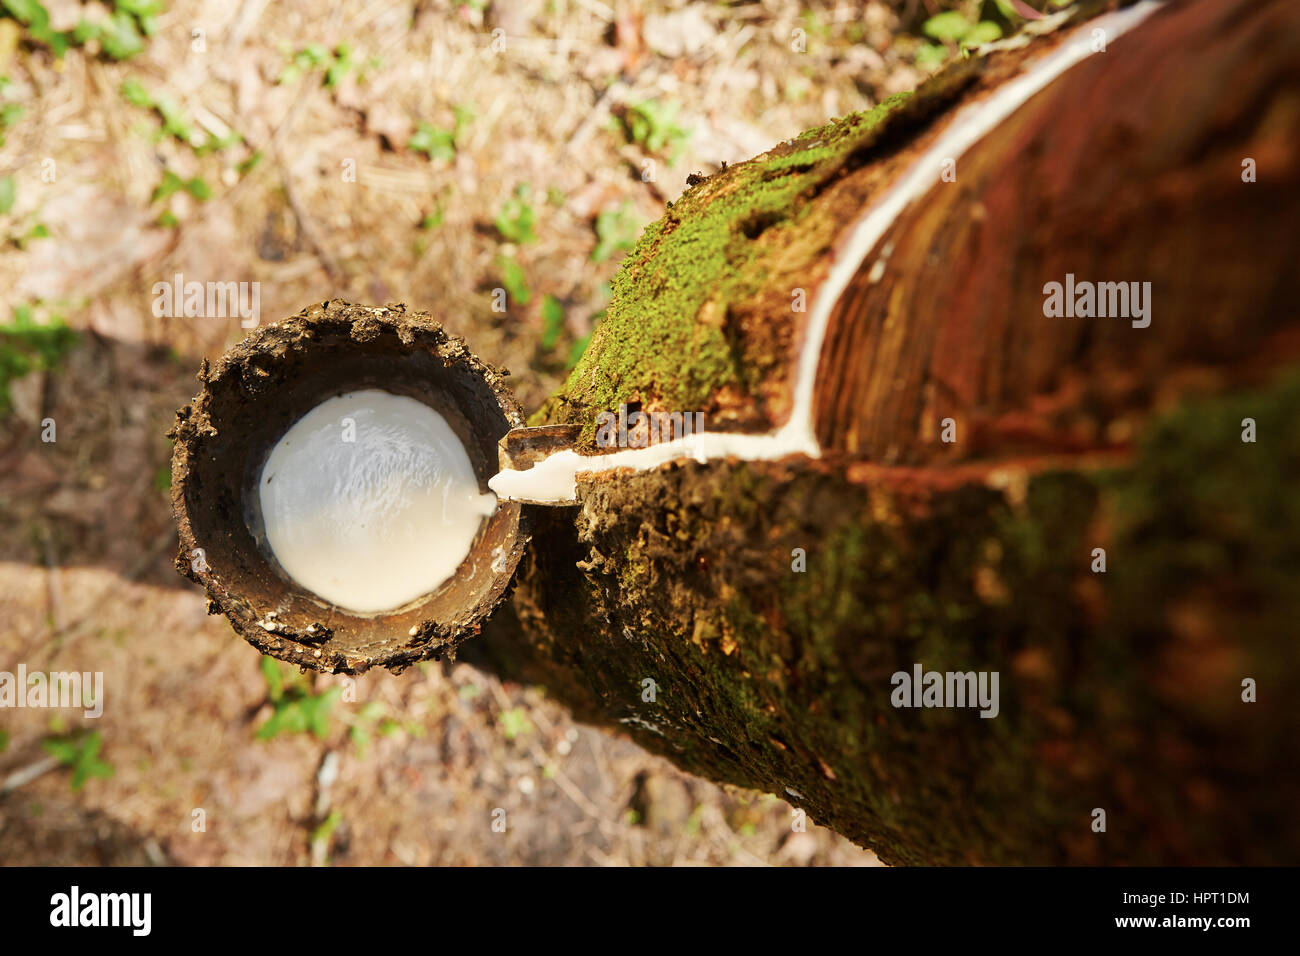 Tapping sap from the rubber tree in Sri Lanka Stock Photo